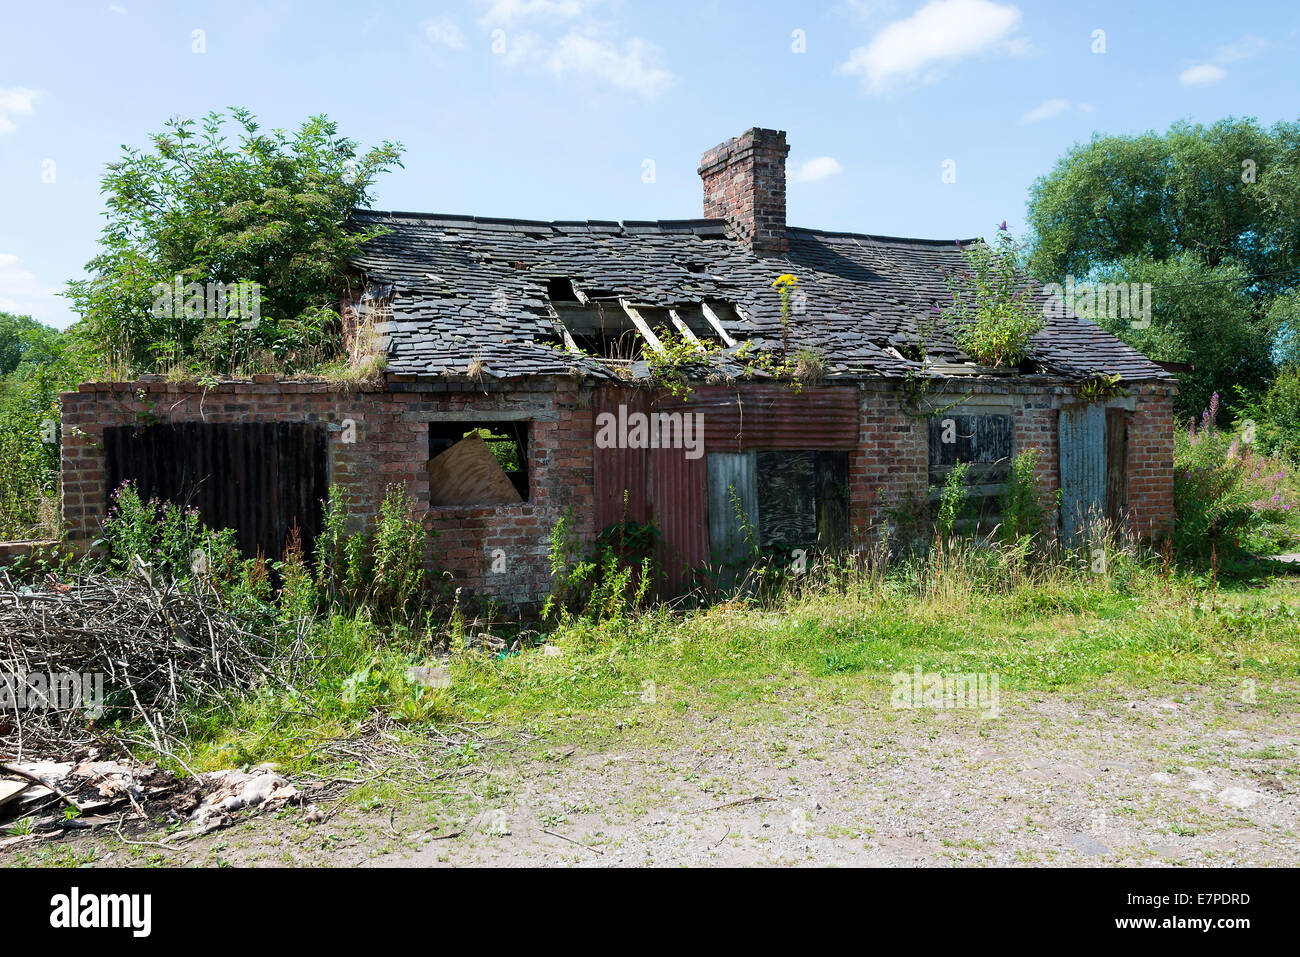 Dilapidated and Run Down Building on the Trent and Mersey Canal at Rode Heath Cheshire England United Kingdom UK Stock Photo